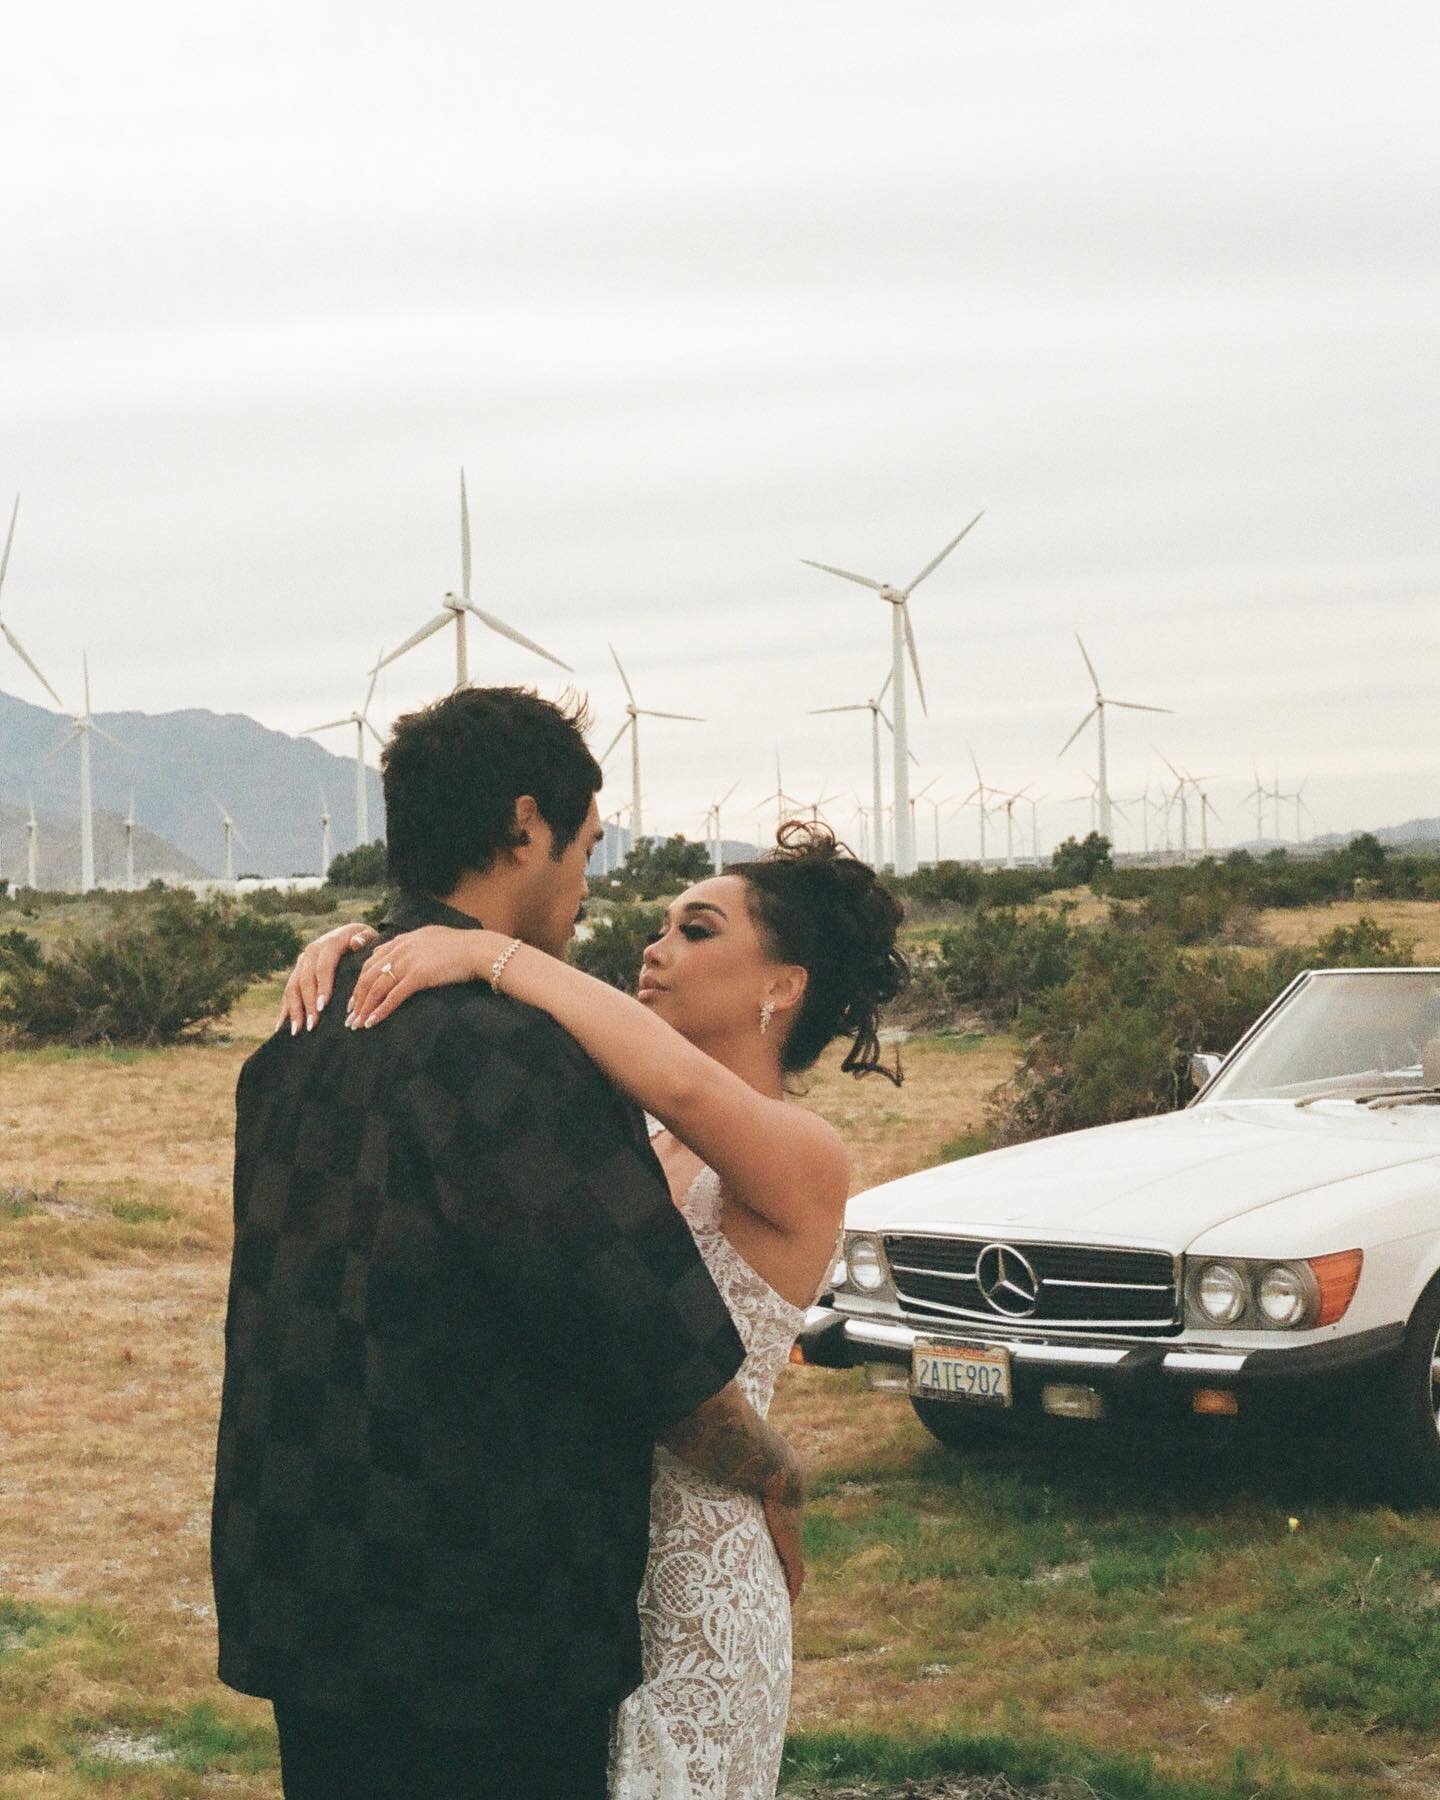 Film photos are in 🎞️🖤 all shot on a cannon A1 
Can&rsquo;t wait to more from this engagement session in Palm Springs @shannenichole @rymarco .
.
.
Makeup: @keybeauty 
Hair: @matrimonymanes 
.
.
.
Palm springs, Palm springs engagement session, Palm